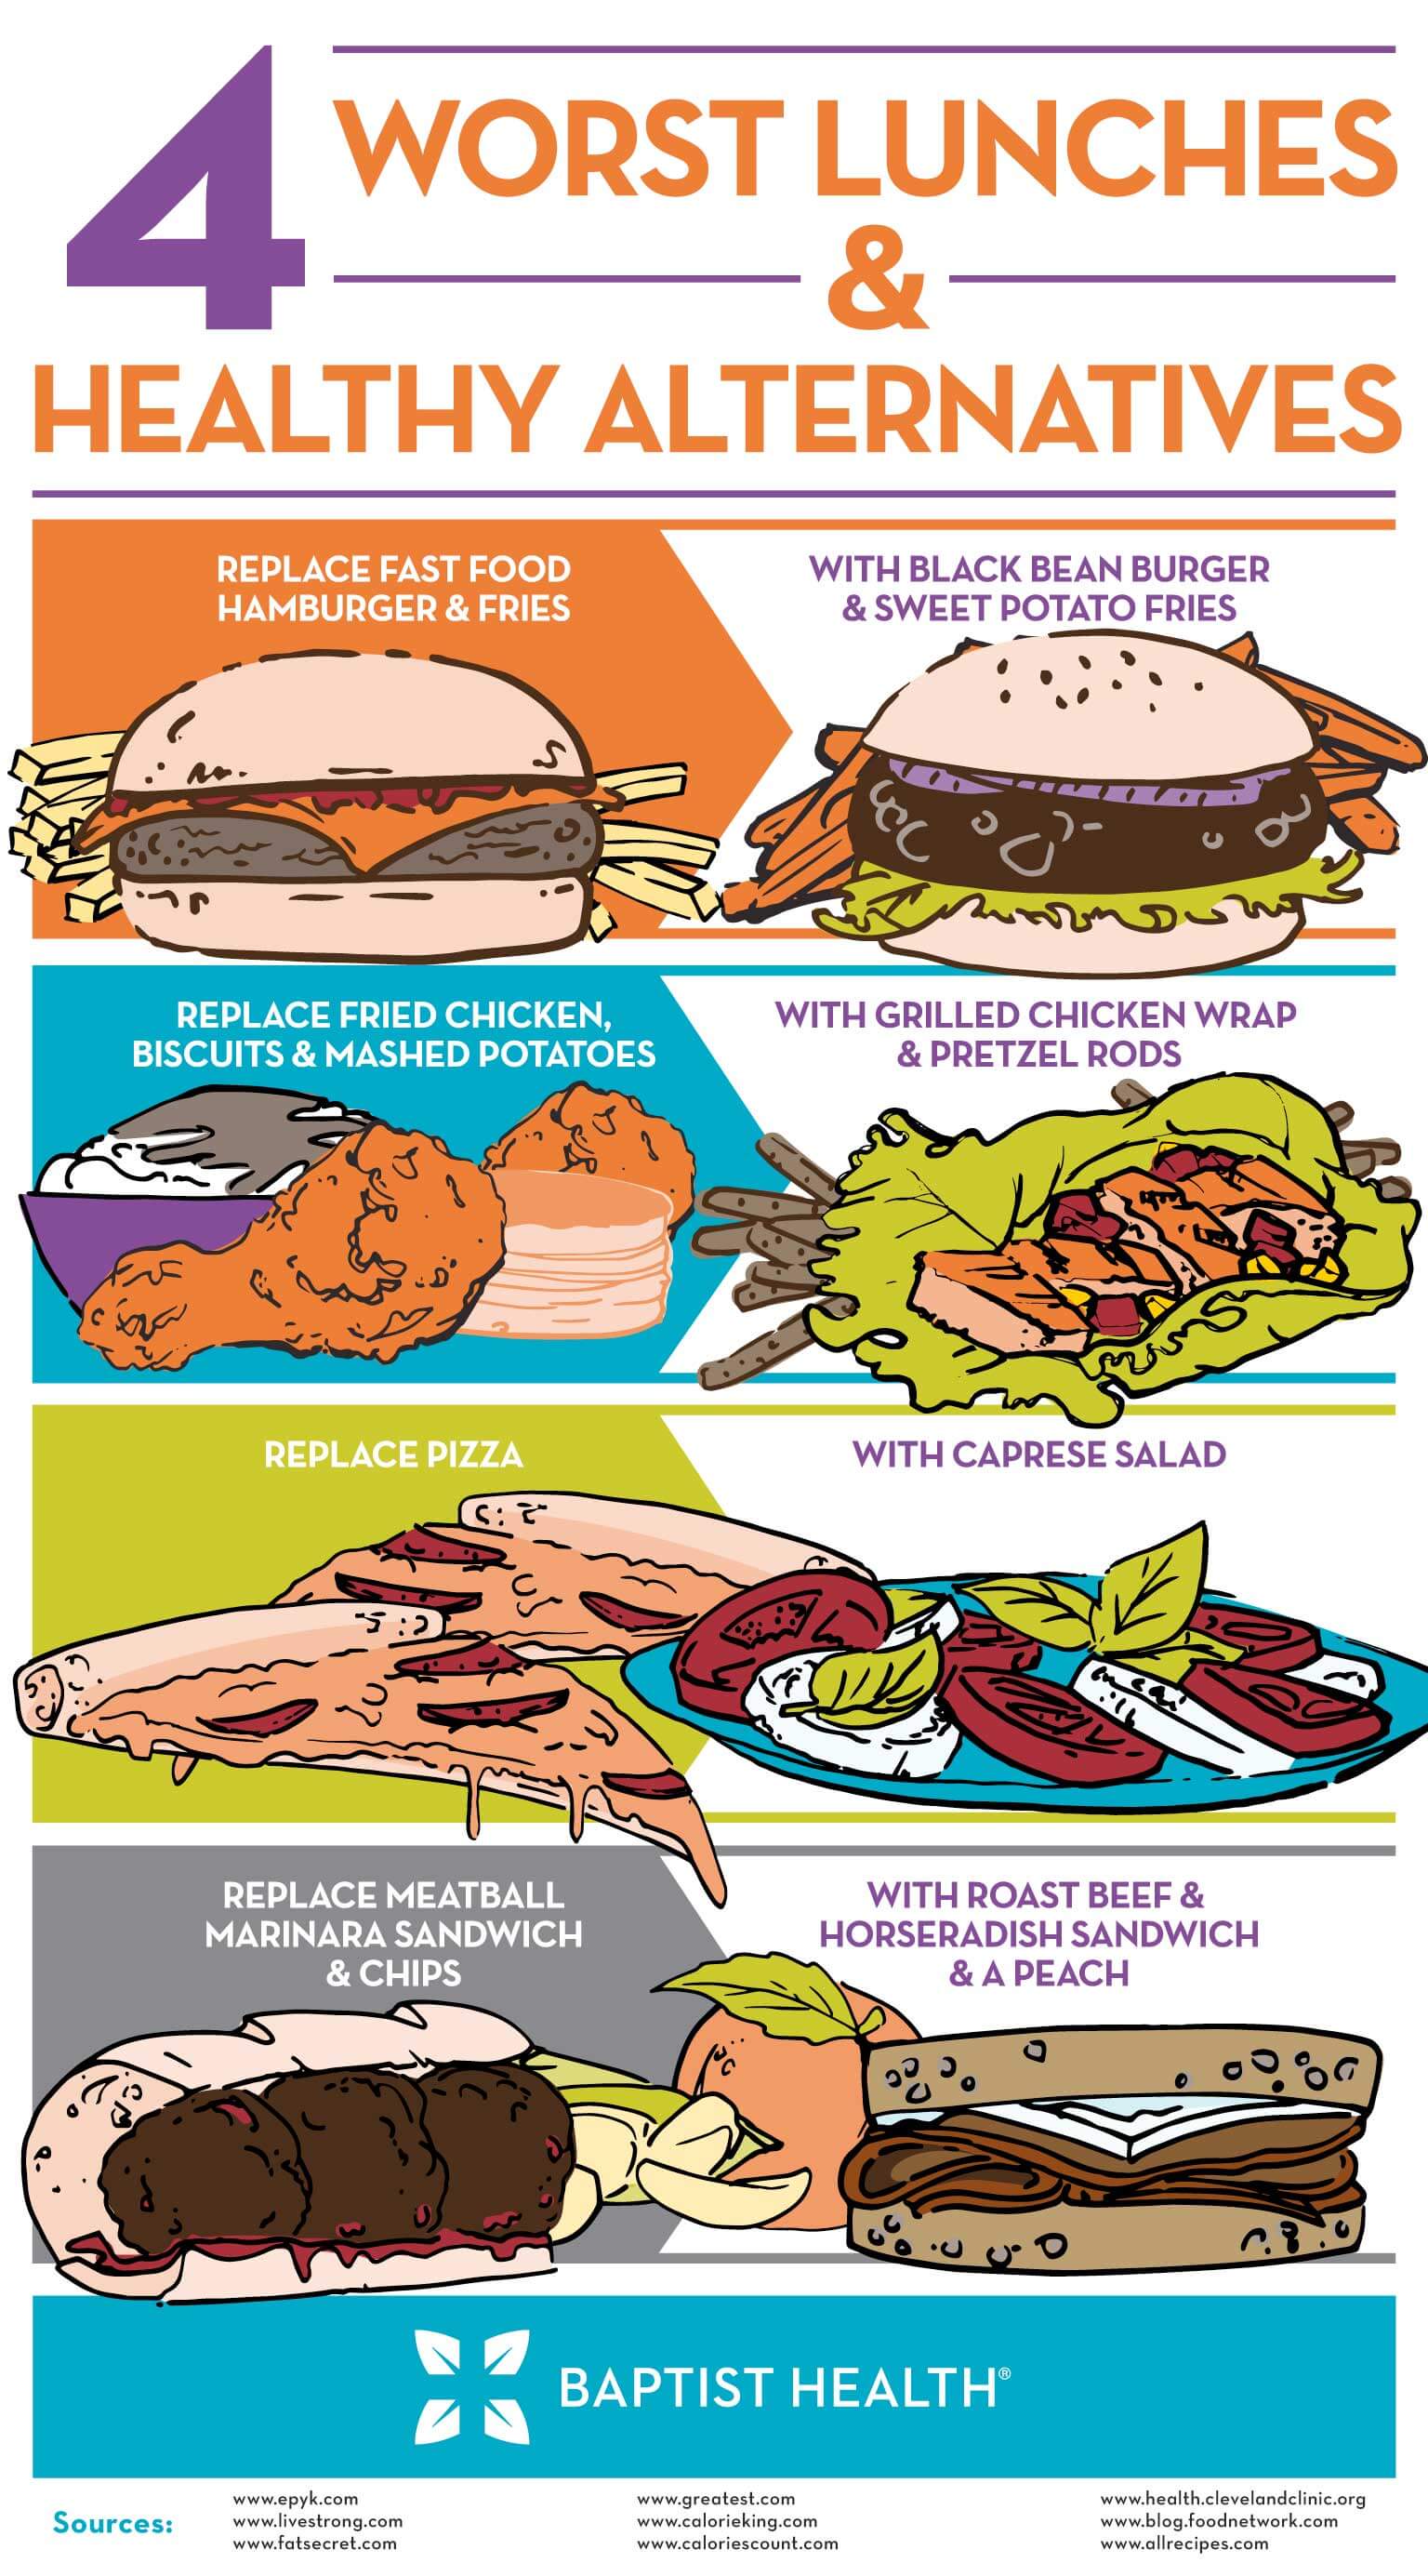 Worst-Lunches-Infographic-061616